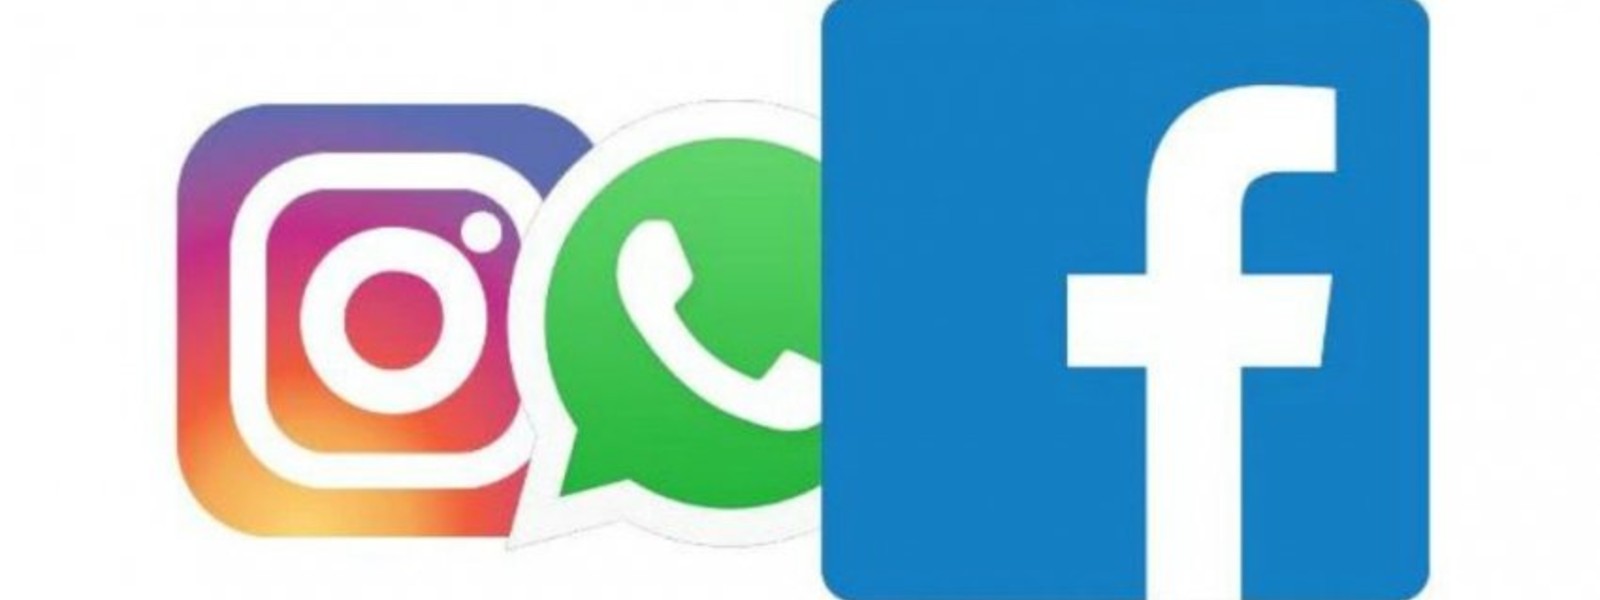 Facebook, WhatsApp and Instagram back after brief outage